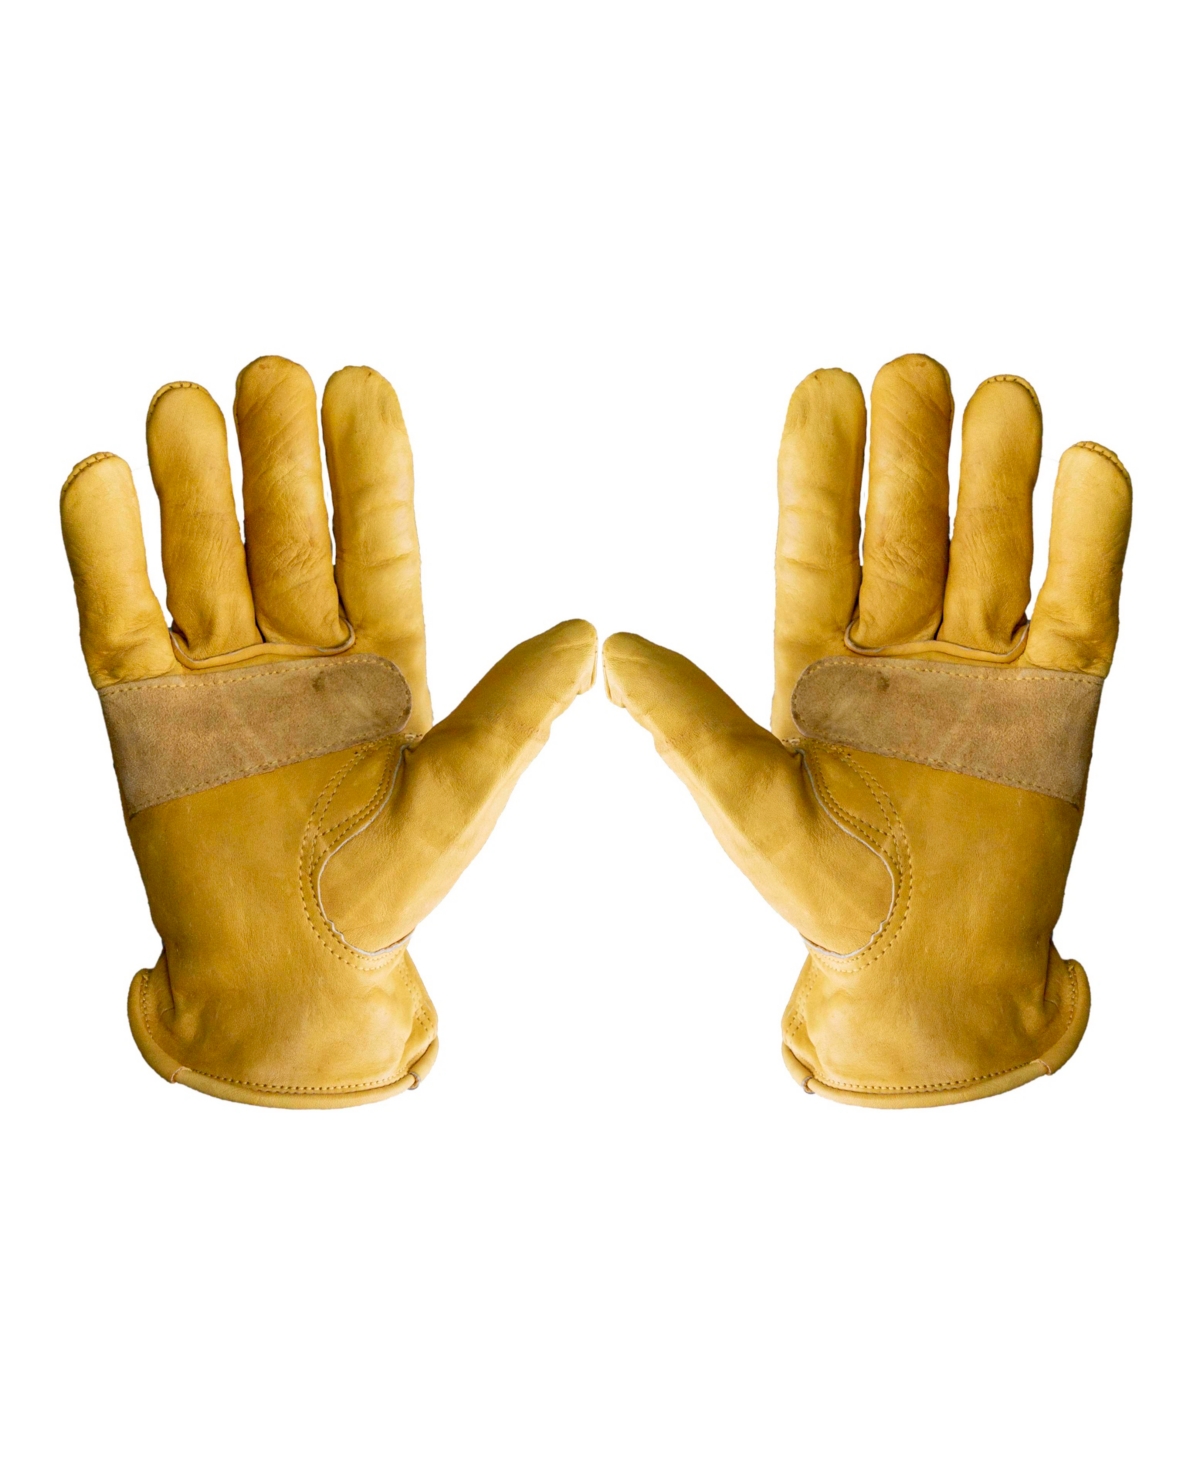 6203 Driving and Work Gloves, 3 Pairs - Natural